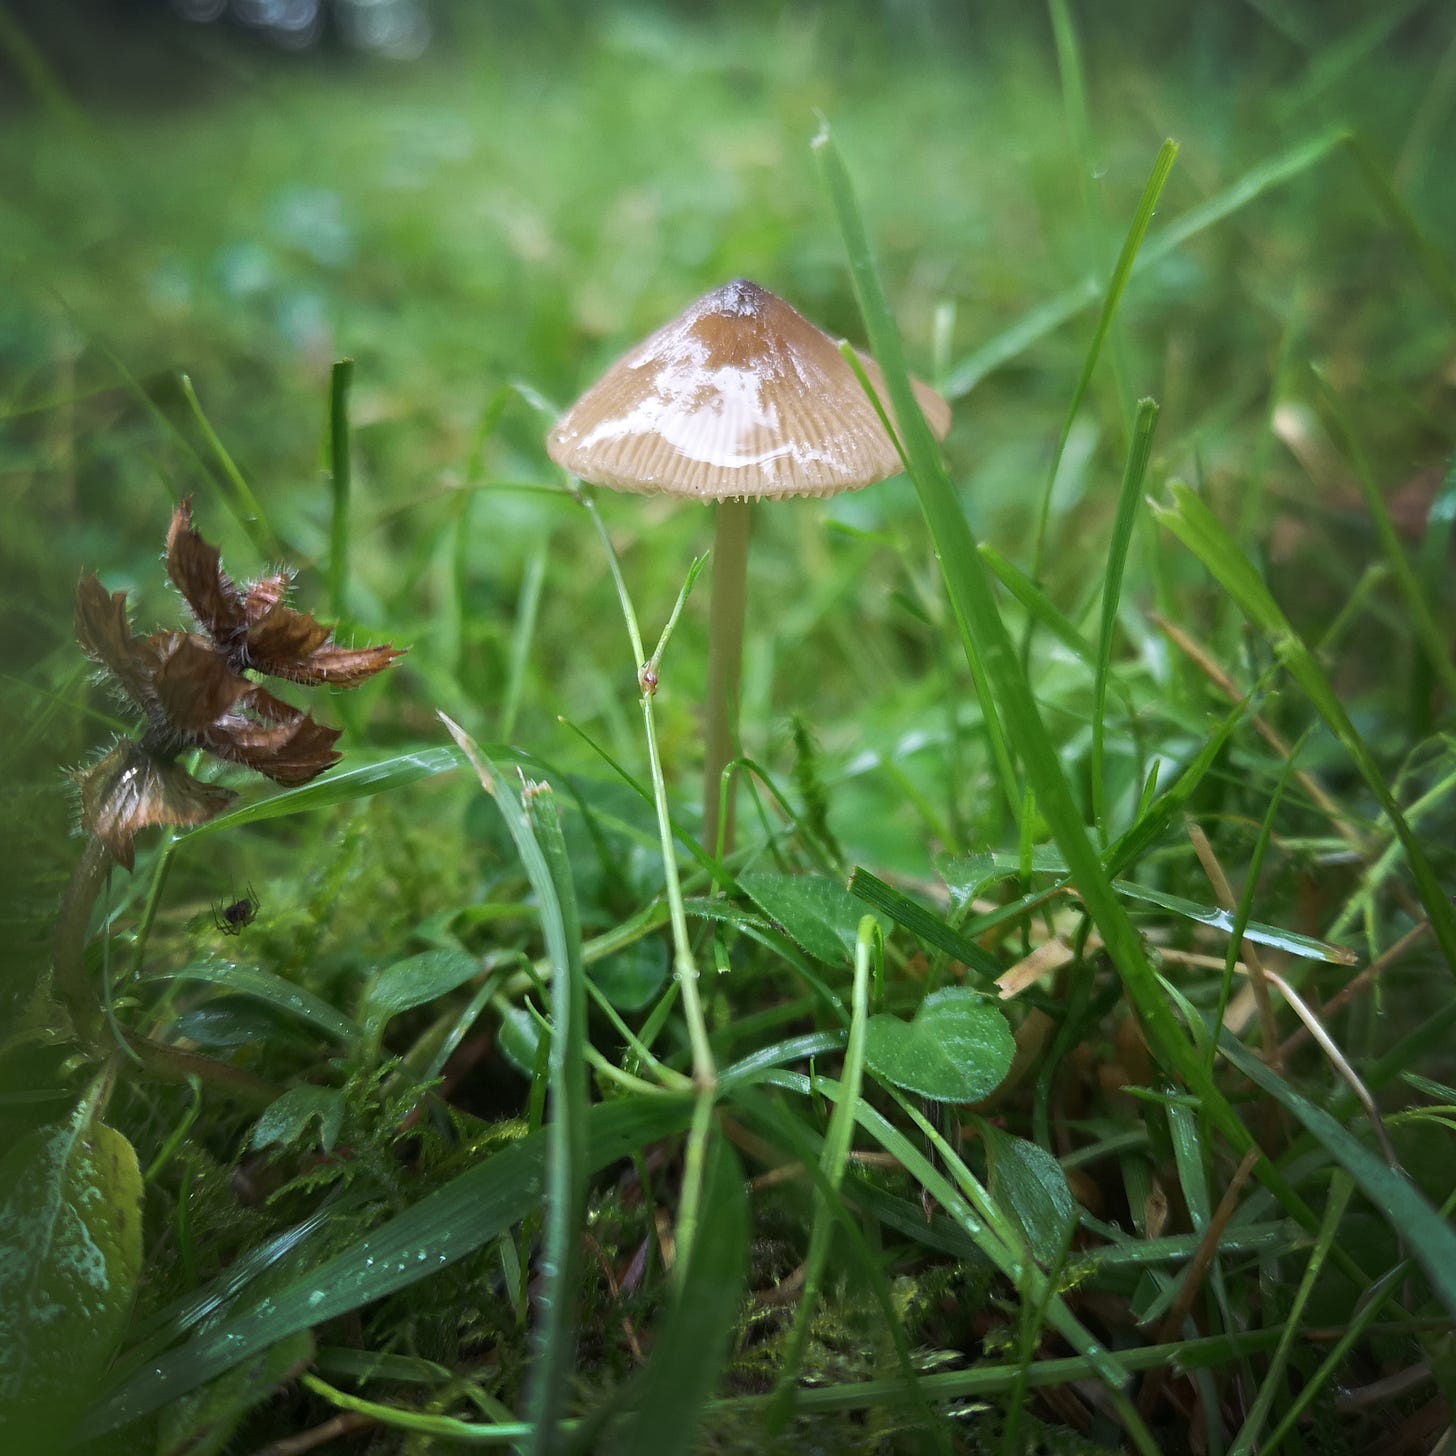 Image description: a tiny pointed brown mushroom on a thin stem rises up among blades of grass. The cap glistens in the delightful damp.